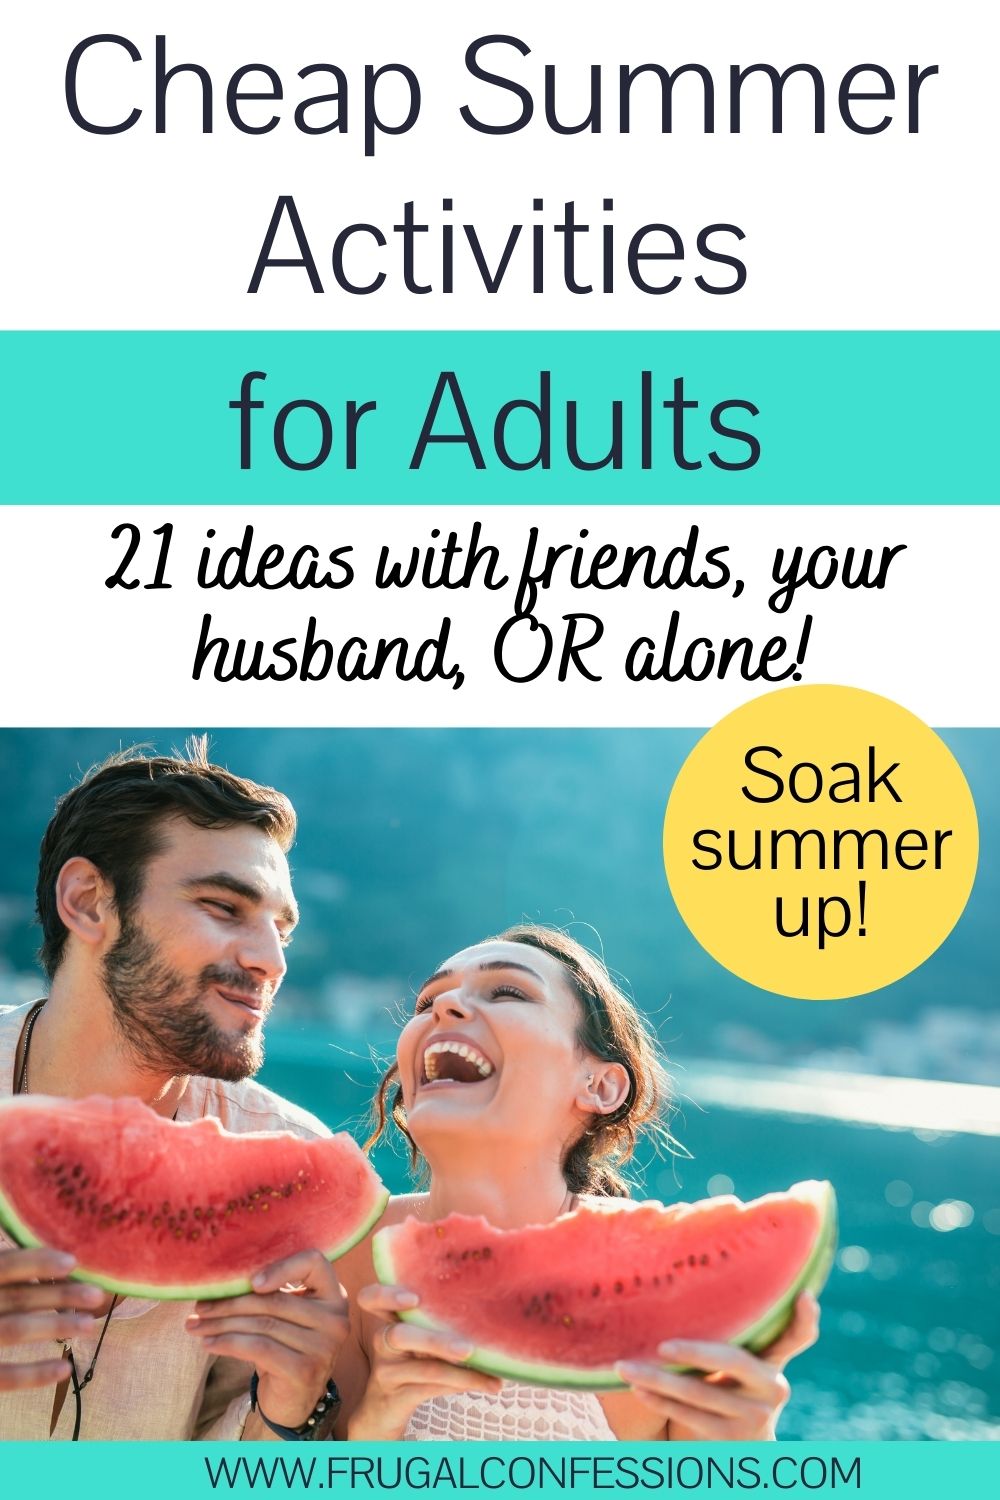 21 Cheap Summer Activities for Adults (Dial up the FUN this summer!)